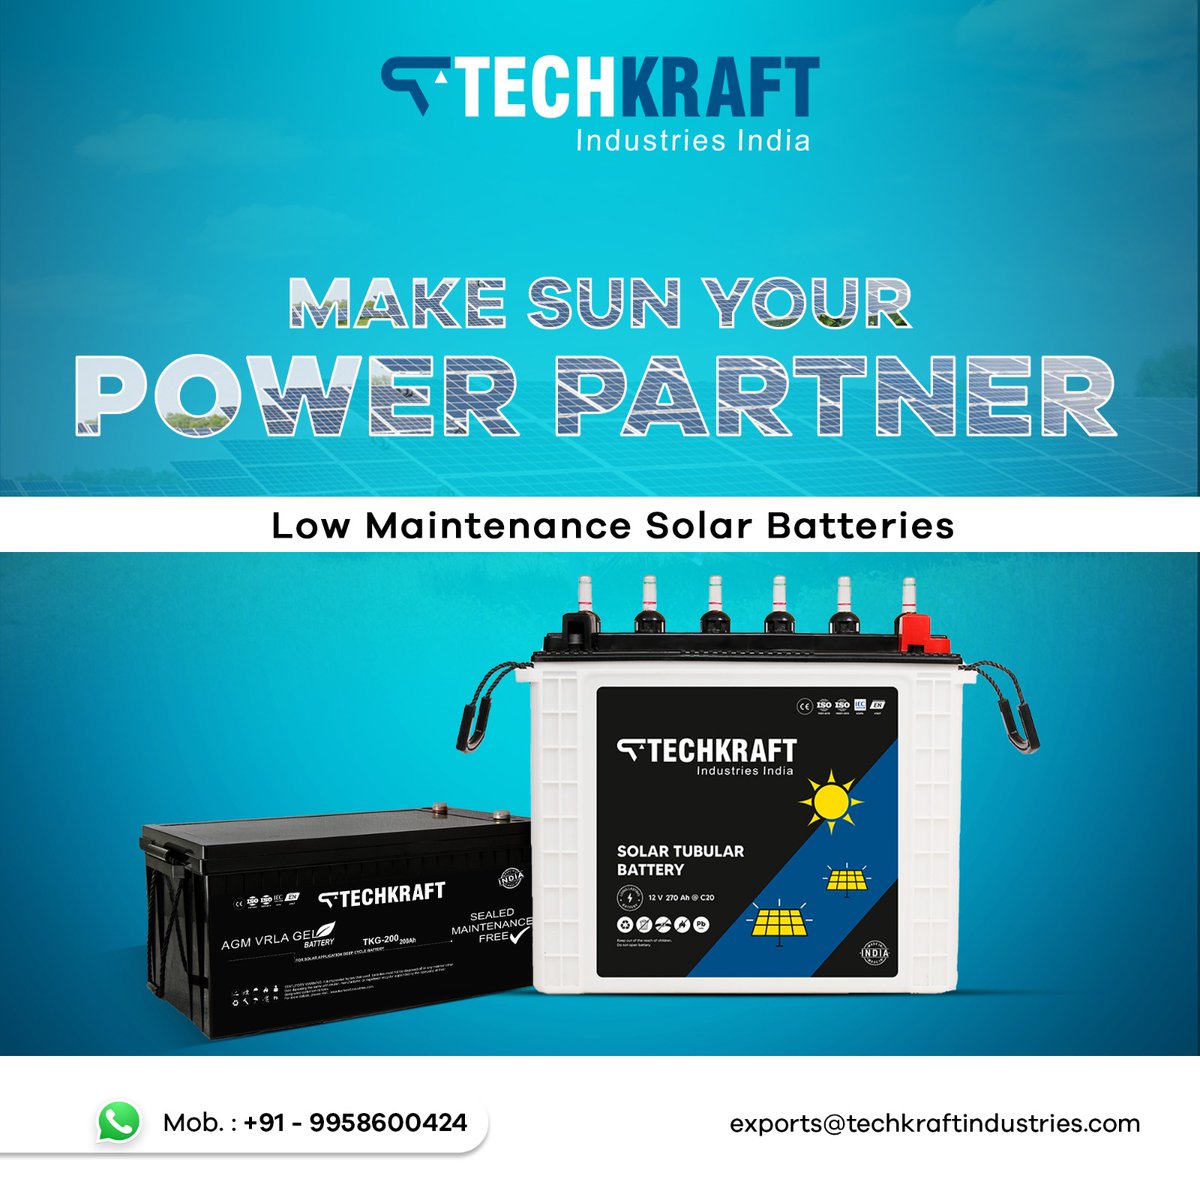 Embrace the future of energy with Techkraft Solar Batteries Make Sun your Power Partner and illuminate your world sustainably! 𝐂𝐨𝐧𝐭𝐚𝐜𝐭 𝐮𝐬 𝐭𝐨 𝐠𝐞𝐭 𝐢𝐭 𝐧𝐨𝐰! 📞: 91 9958600424 💌: export@techkraftindustries.com #techkraftbatteriesindia #solarbattery #solar